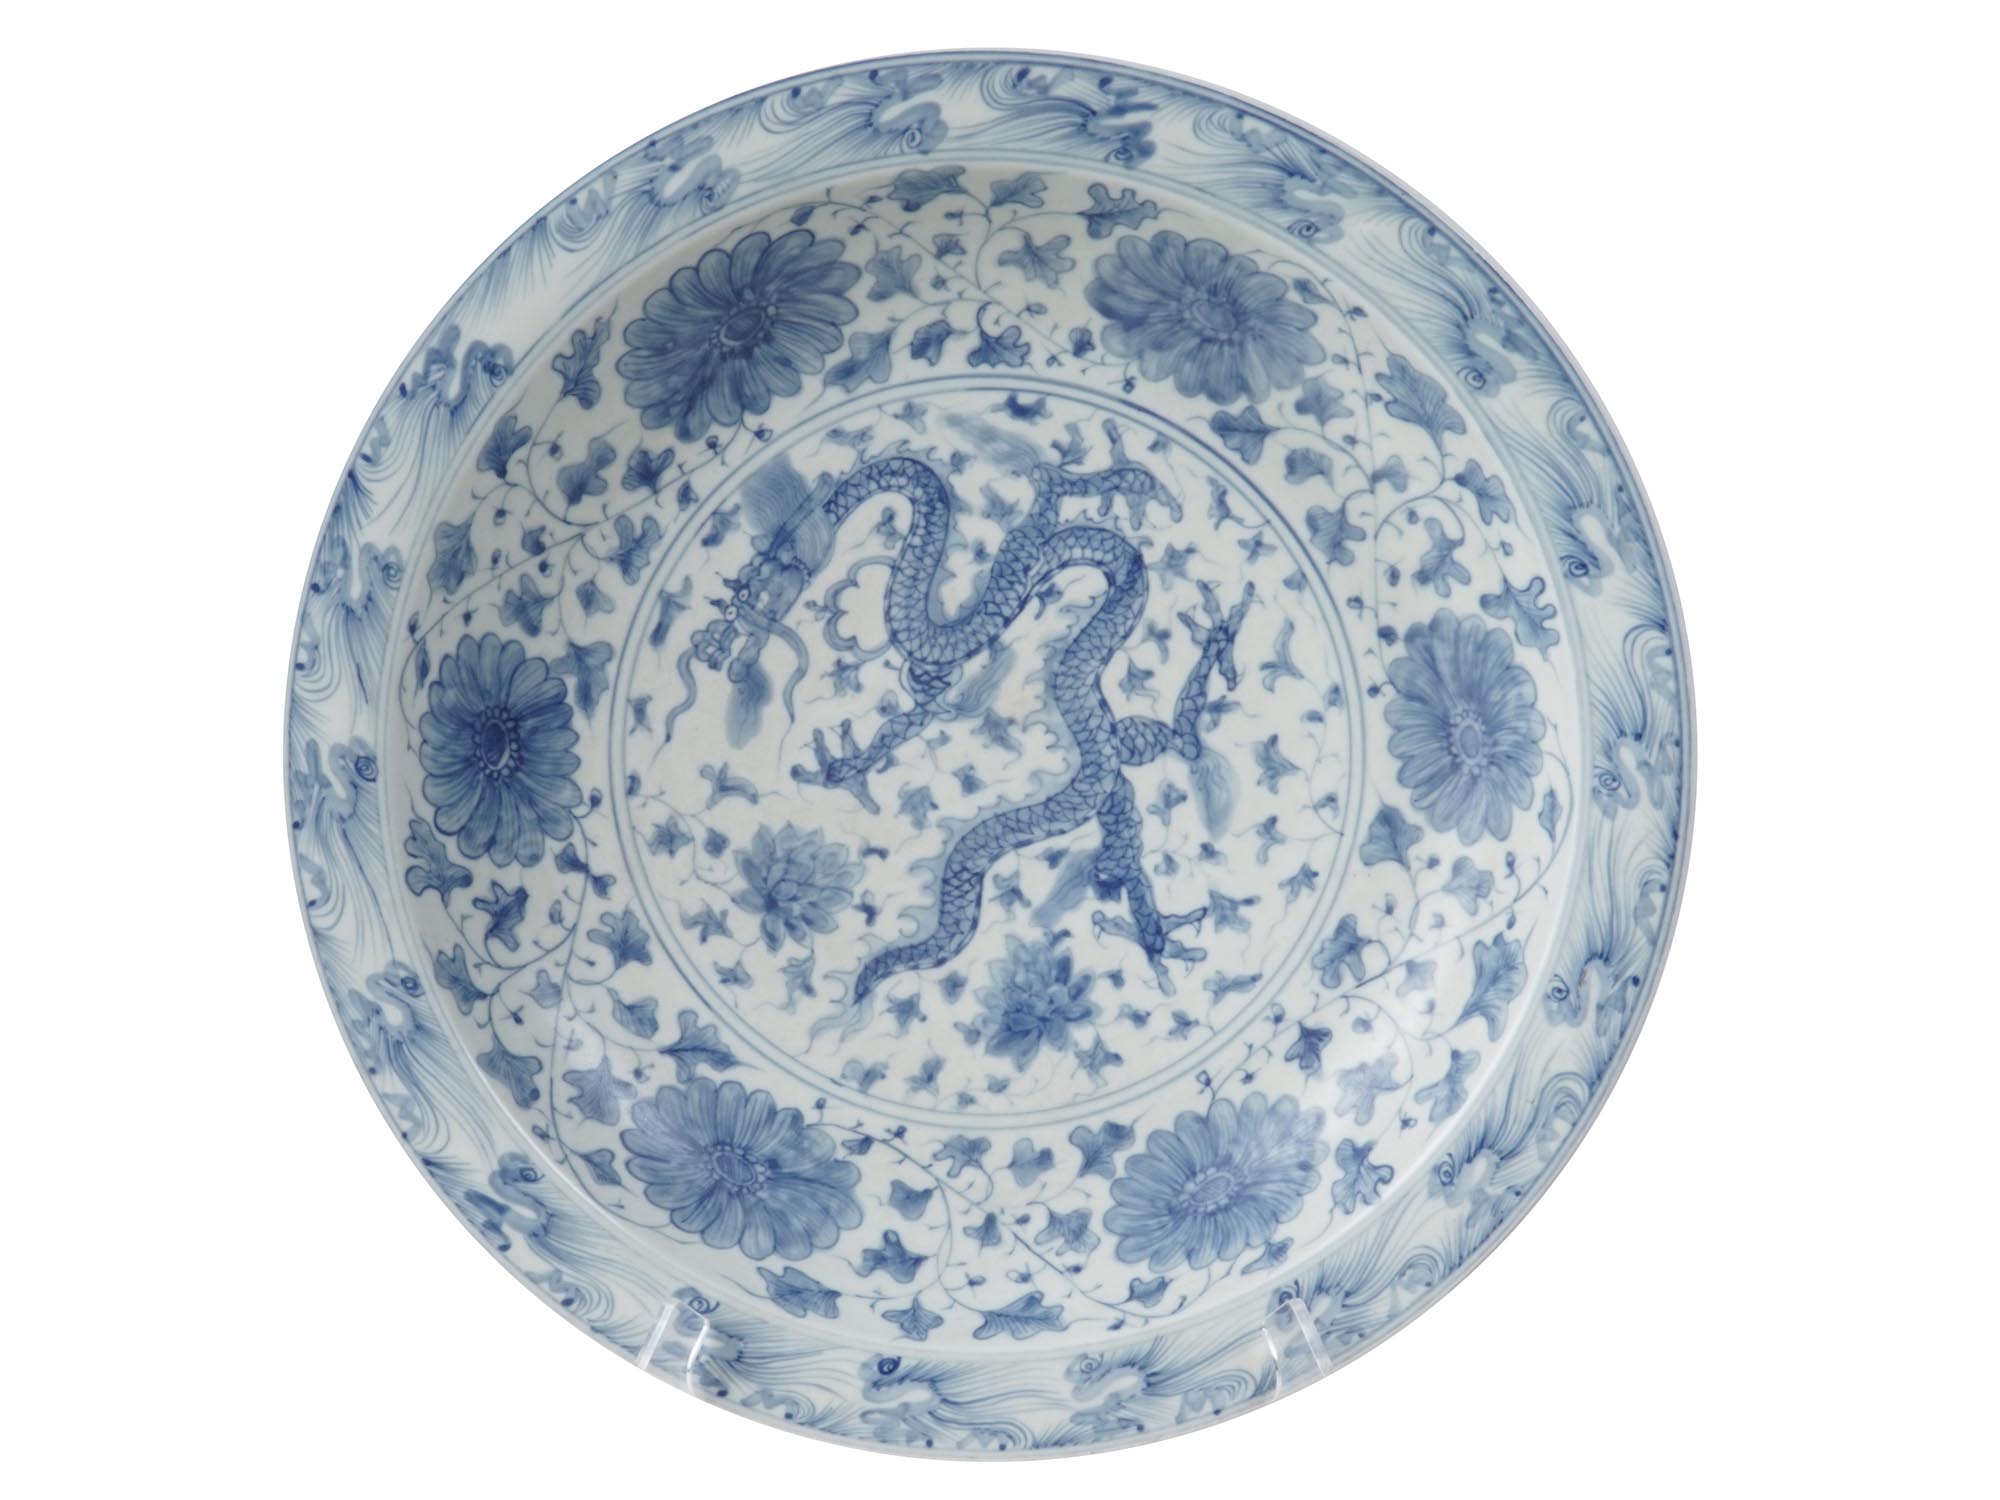 ANTIQUE CHINESE PORCELAIN PLATE WITH DRAGONS PIC-1